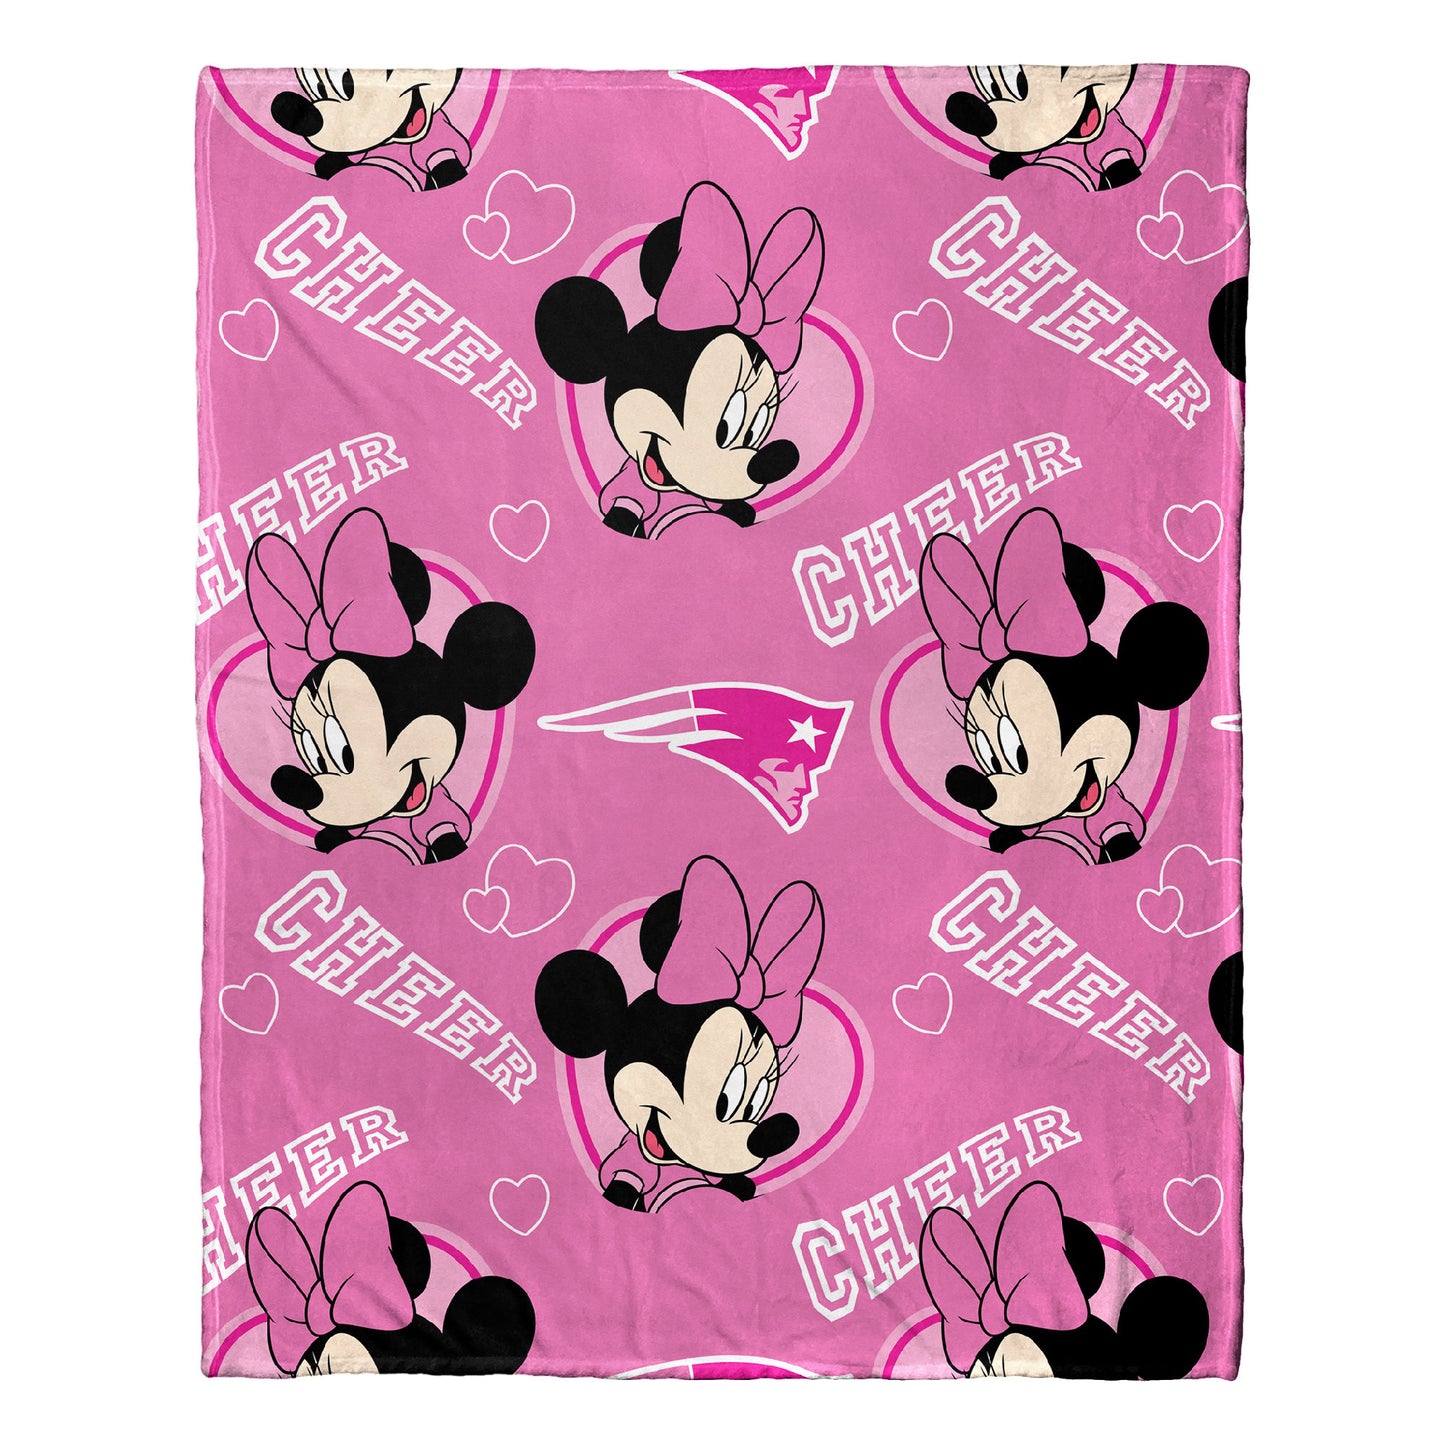 NFL - COB 312 Patriots OFFICIAL NFL & Disney's Minnie Mouse Character Hugger Pillow & Silk Touch Throw Set;  40" x 50"